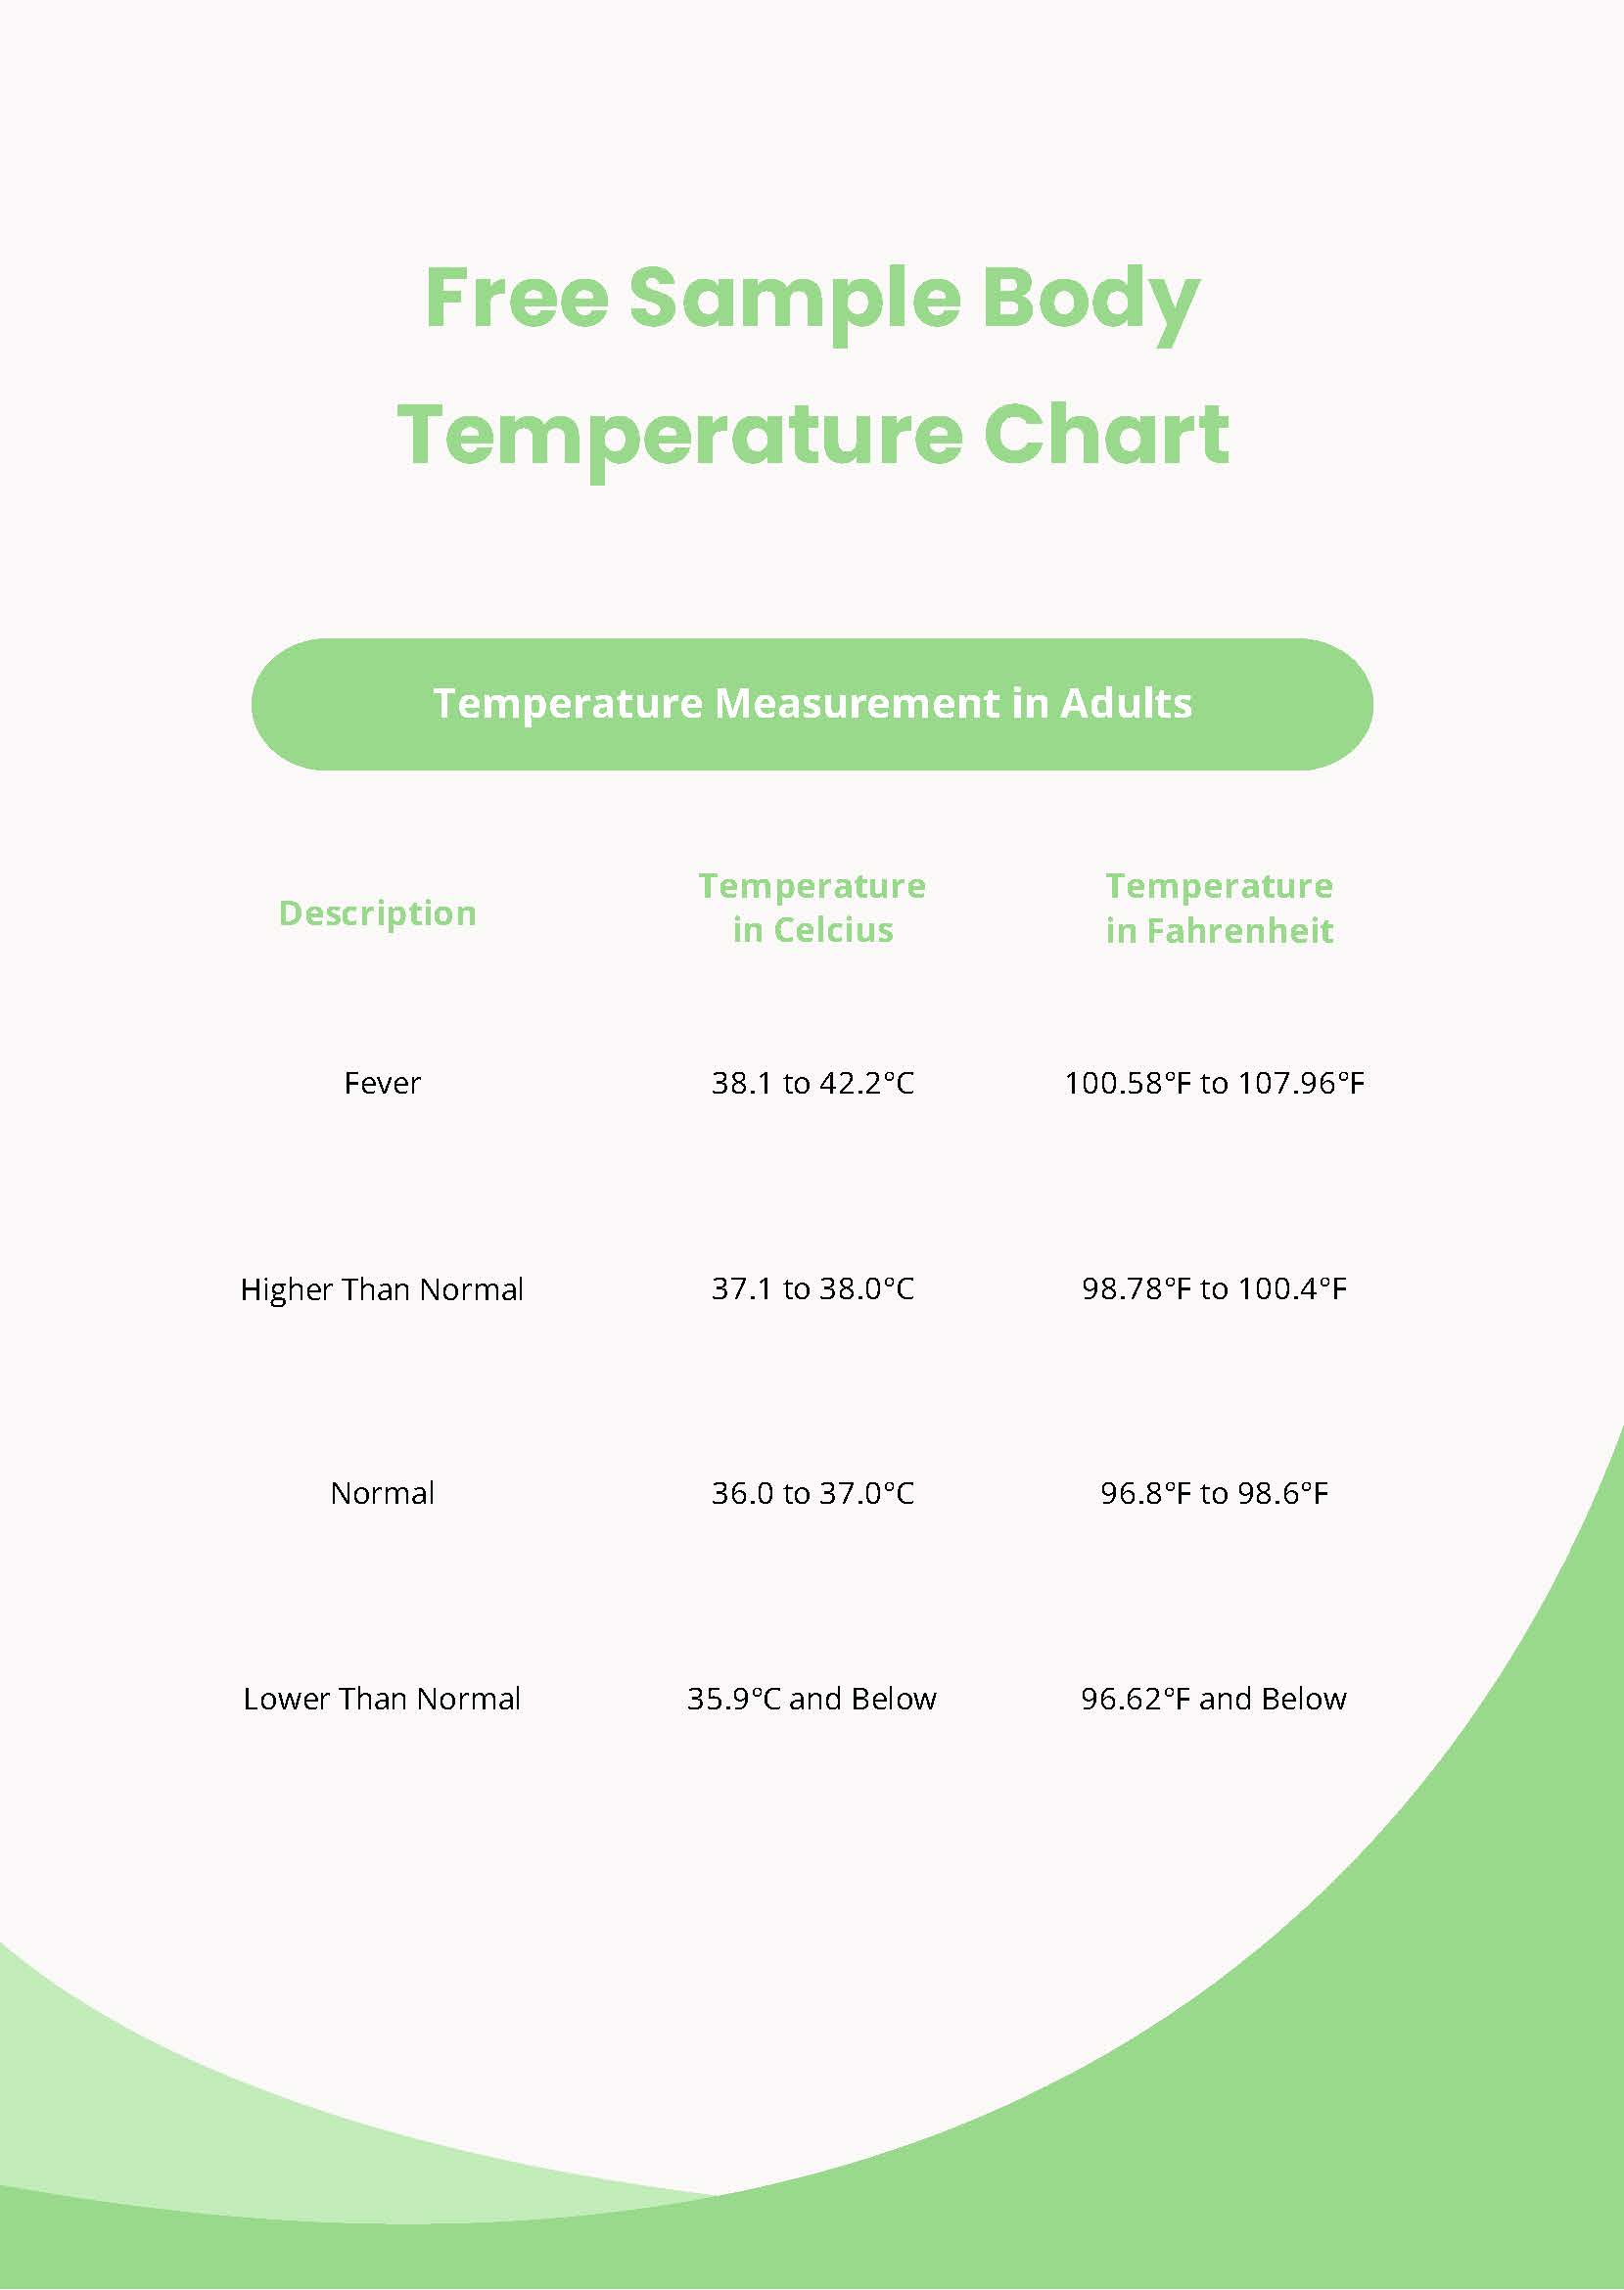 Download Celsius to Fahrenheit Chart for Free - FormTemplate